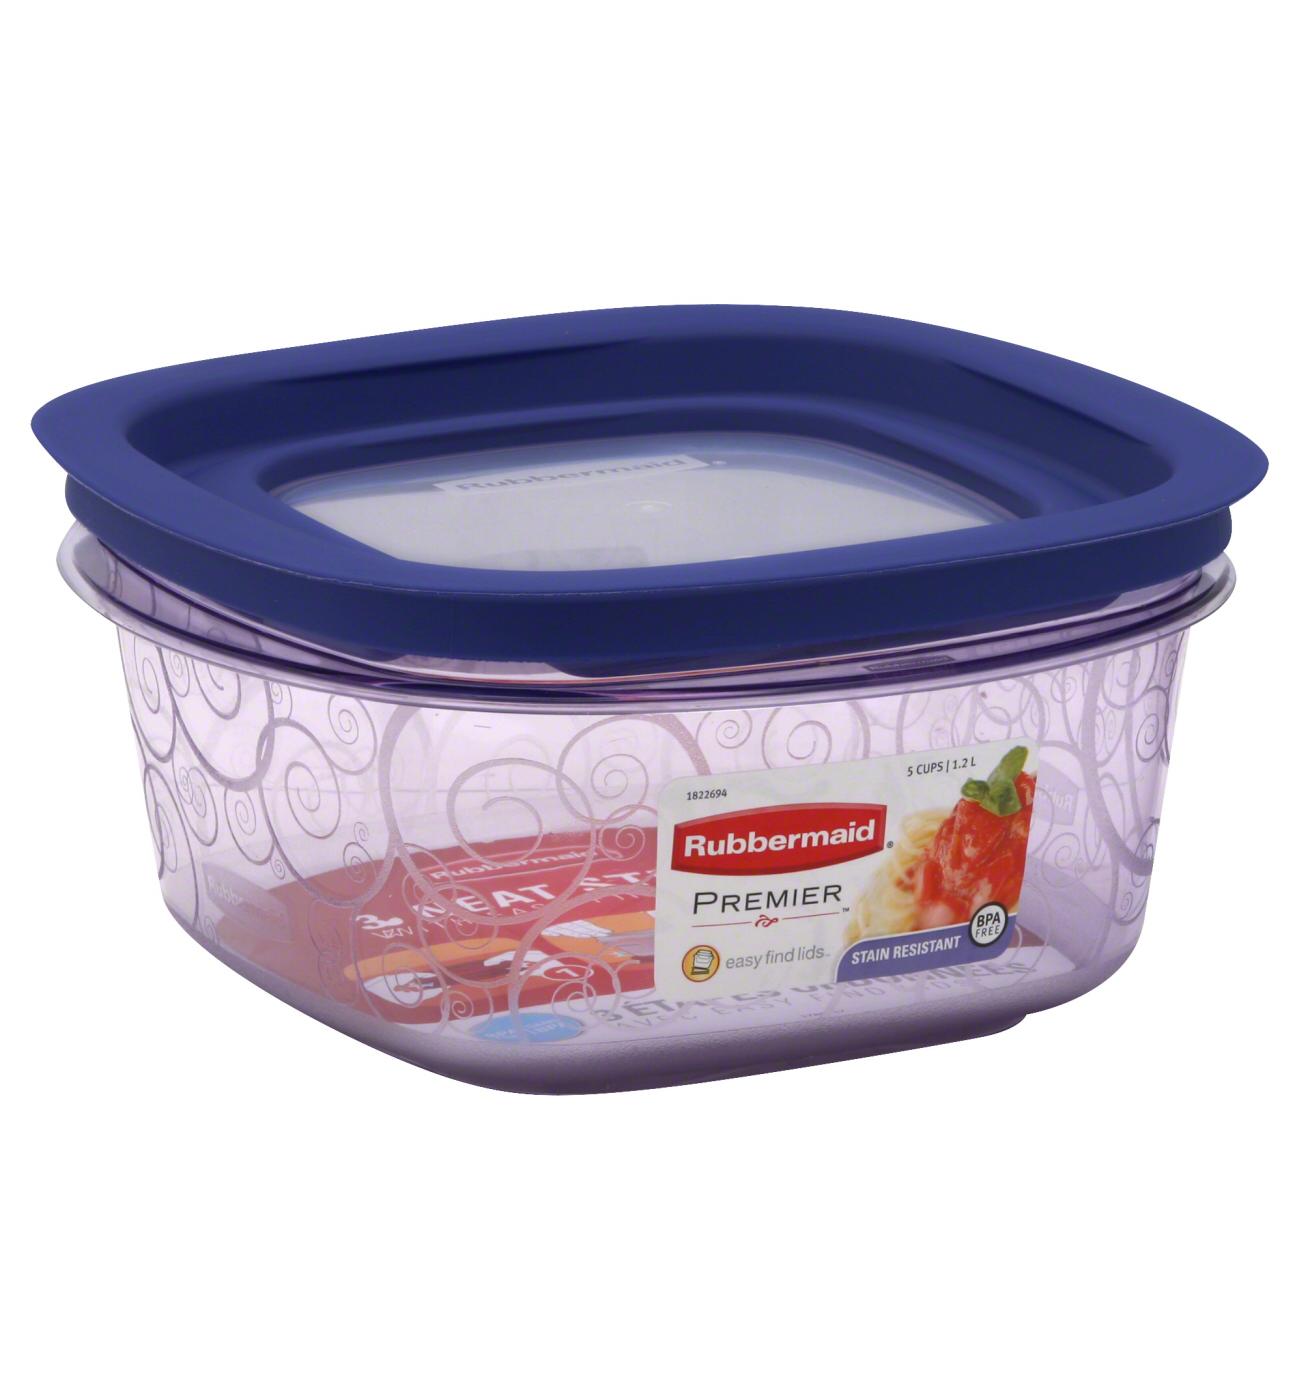 Rubbermaid Premier Easy Find Lids Food Storage Containers, Purple